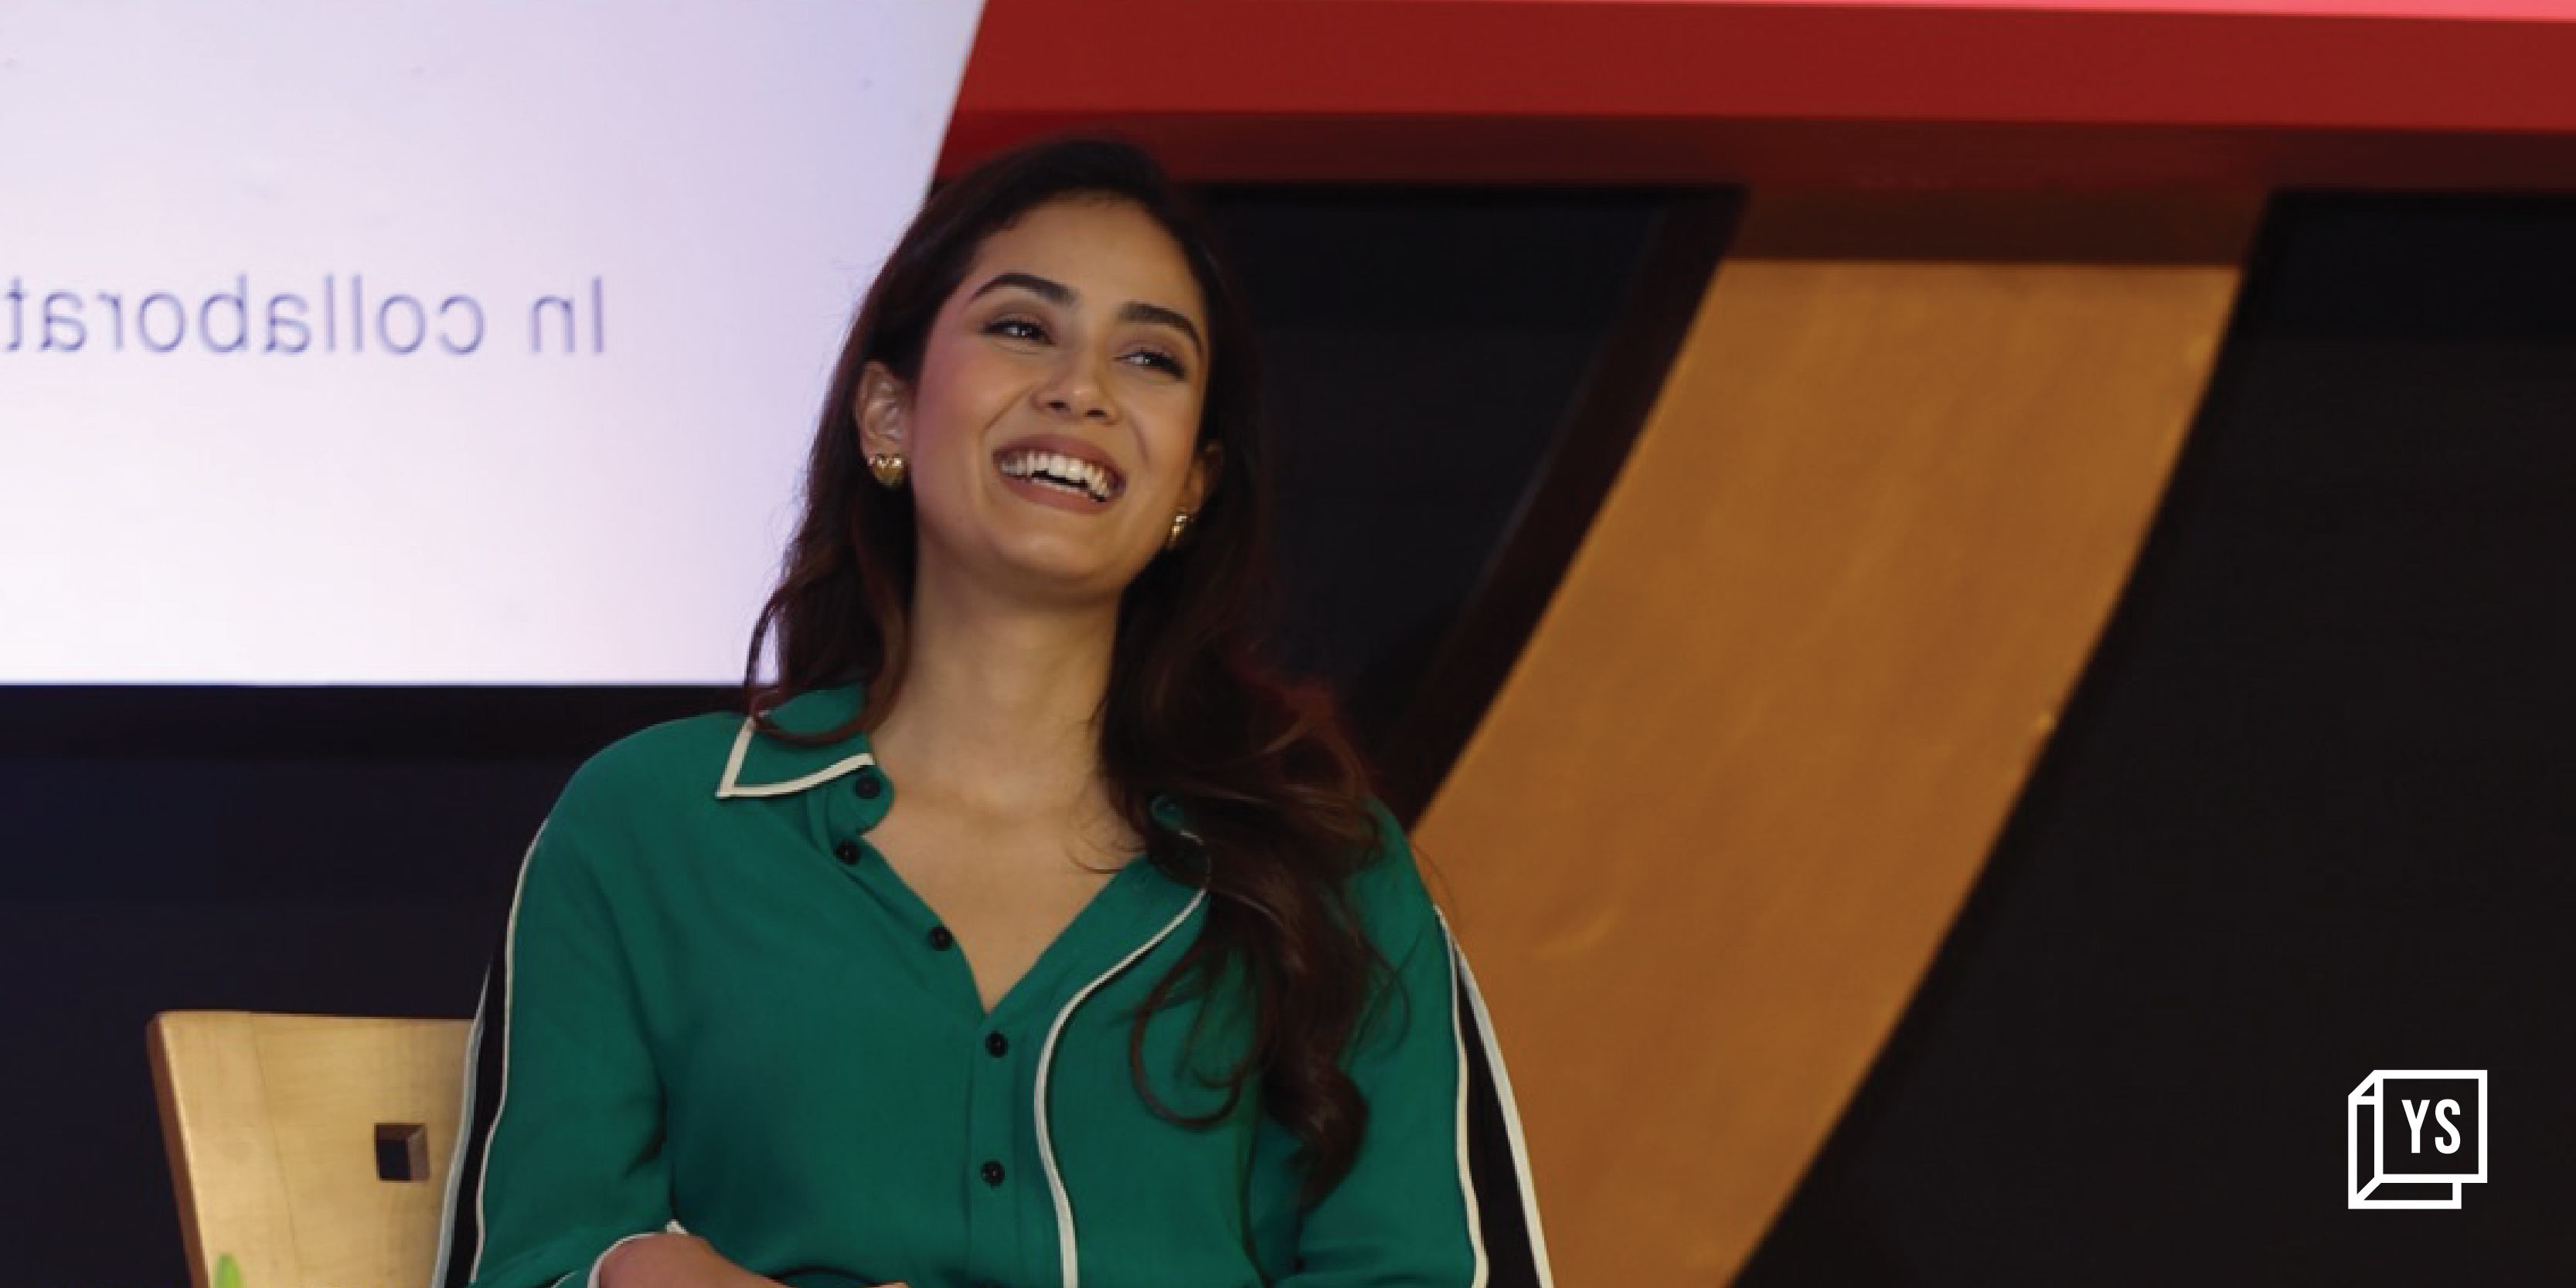 Being authentic works for brands and people: Mira Rajput Kapoor